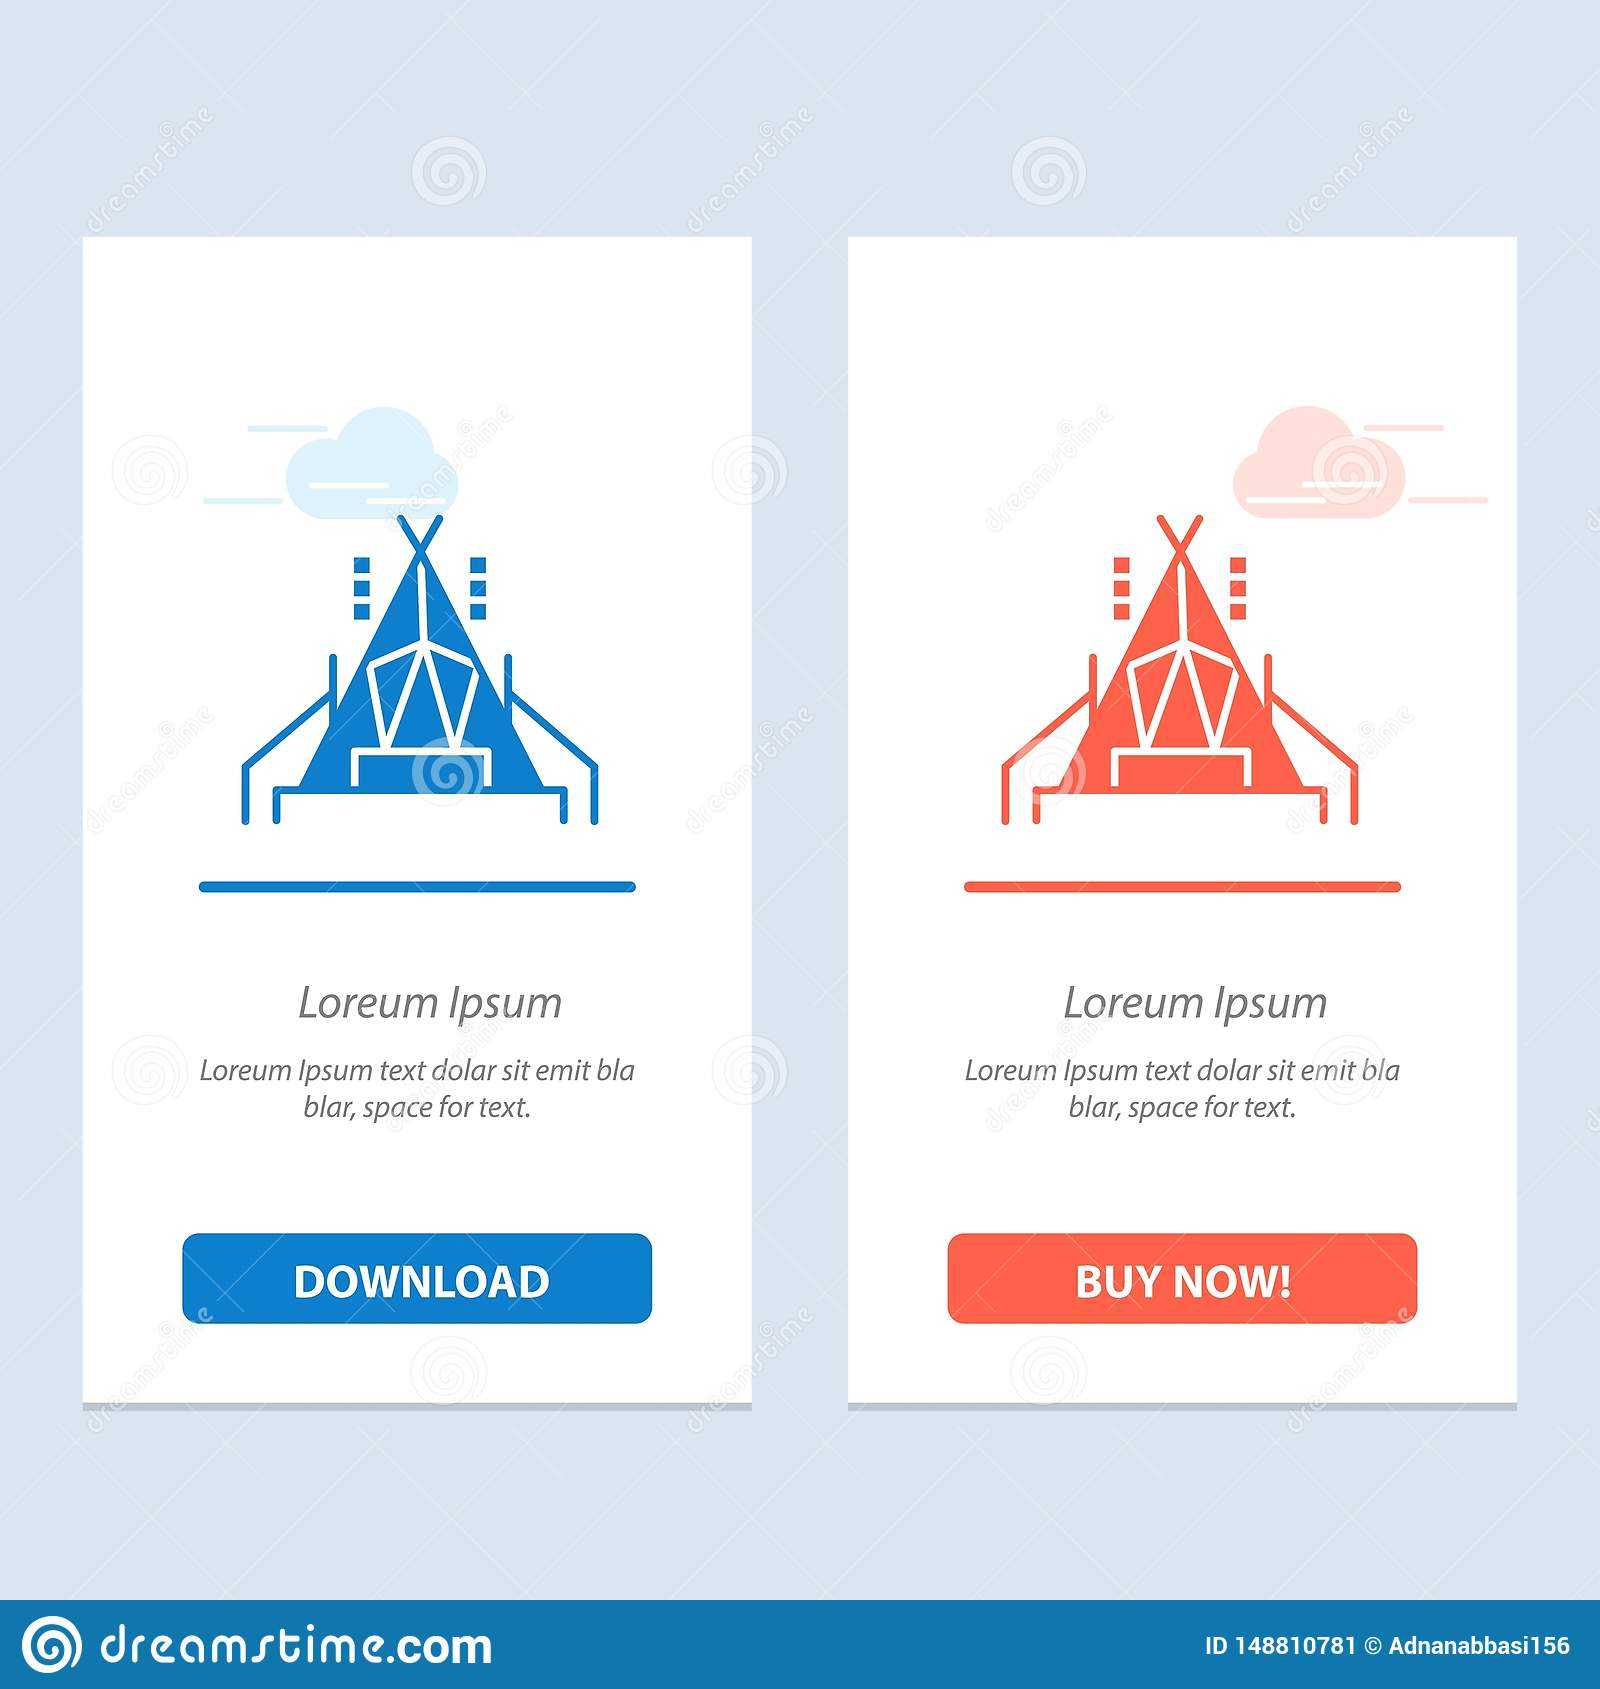 Camp, Tent, Camping Blue And Red Download And Buy Now Web Throughout Free Tent Card Template Downloads